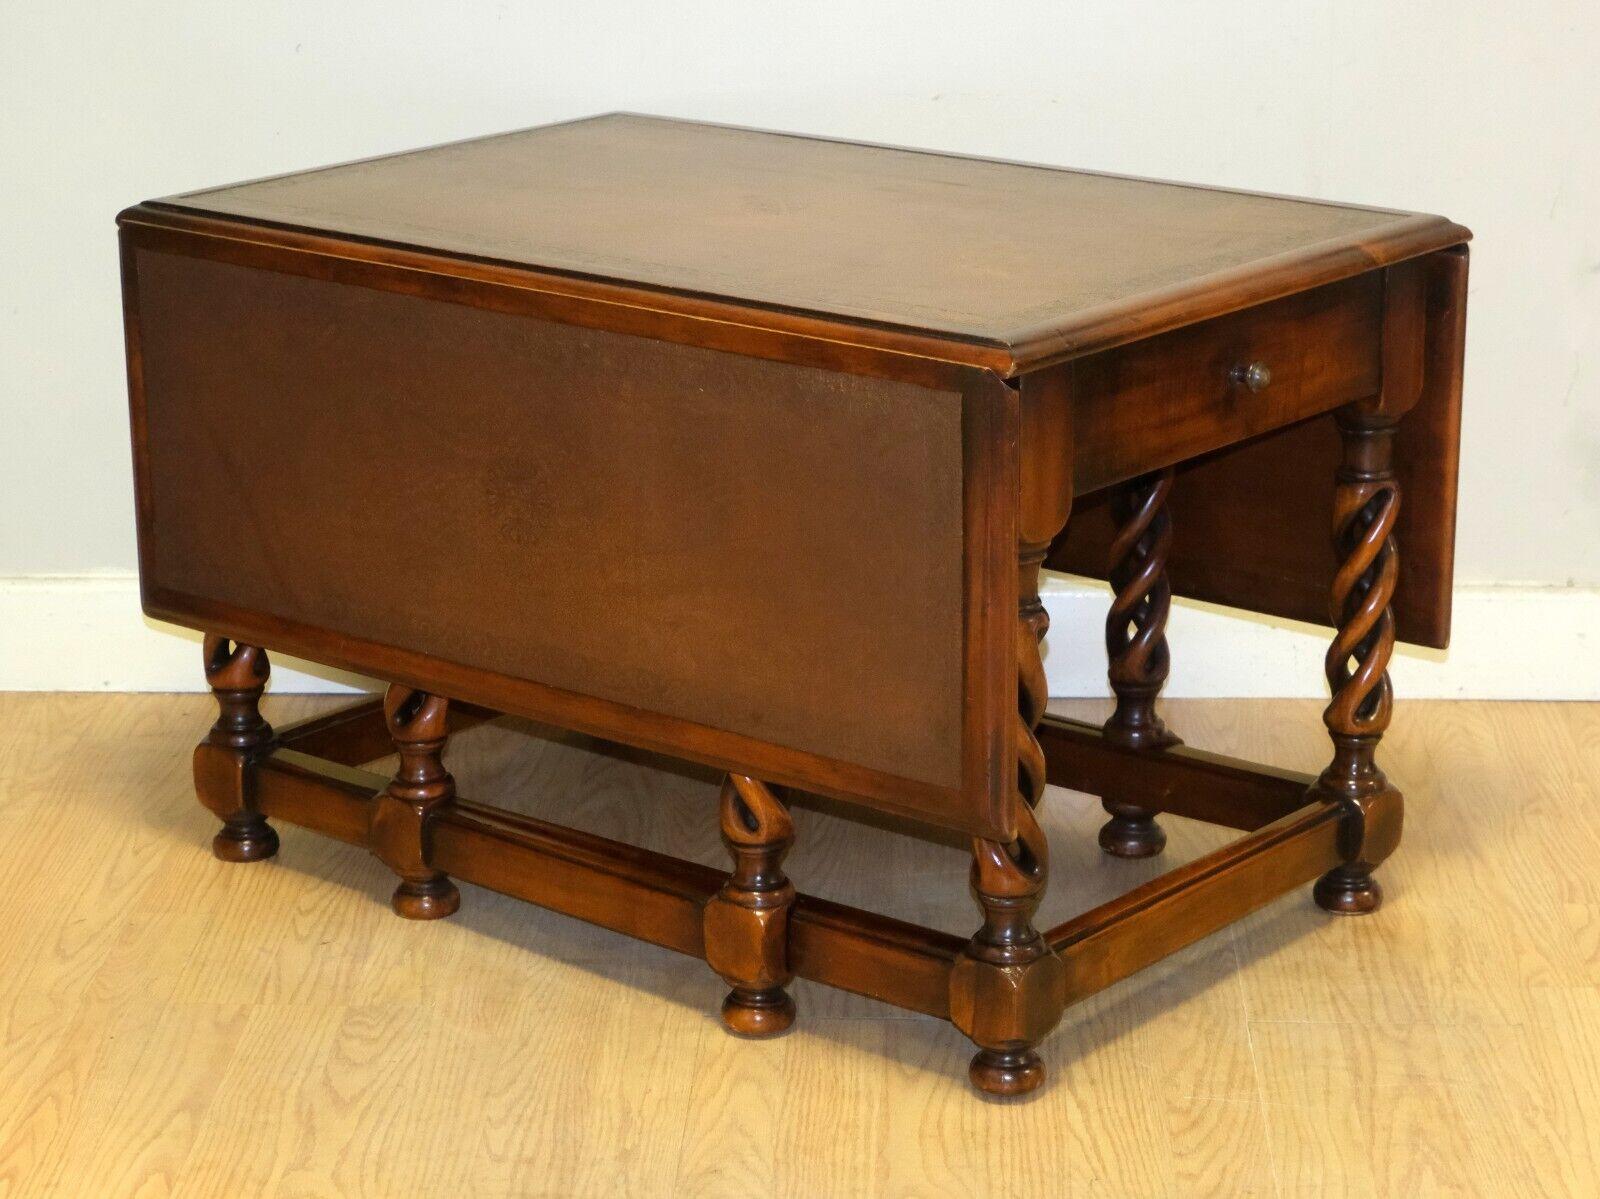 Hardwood ELEGANT THEODORE ALEXANDER DROP LEAF TABLE WiTH LEATHER TOP AND GATE LEGS For Sale